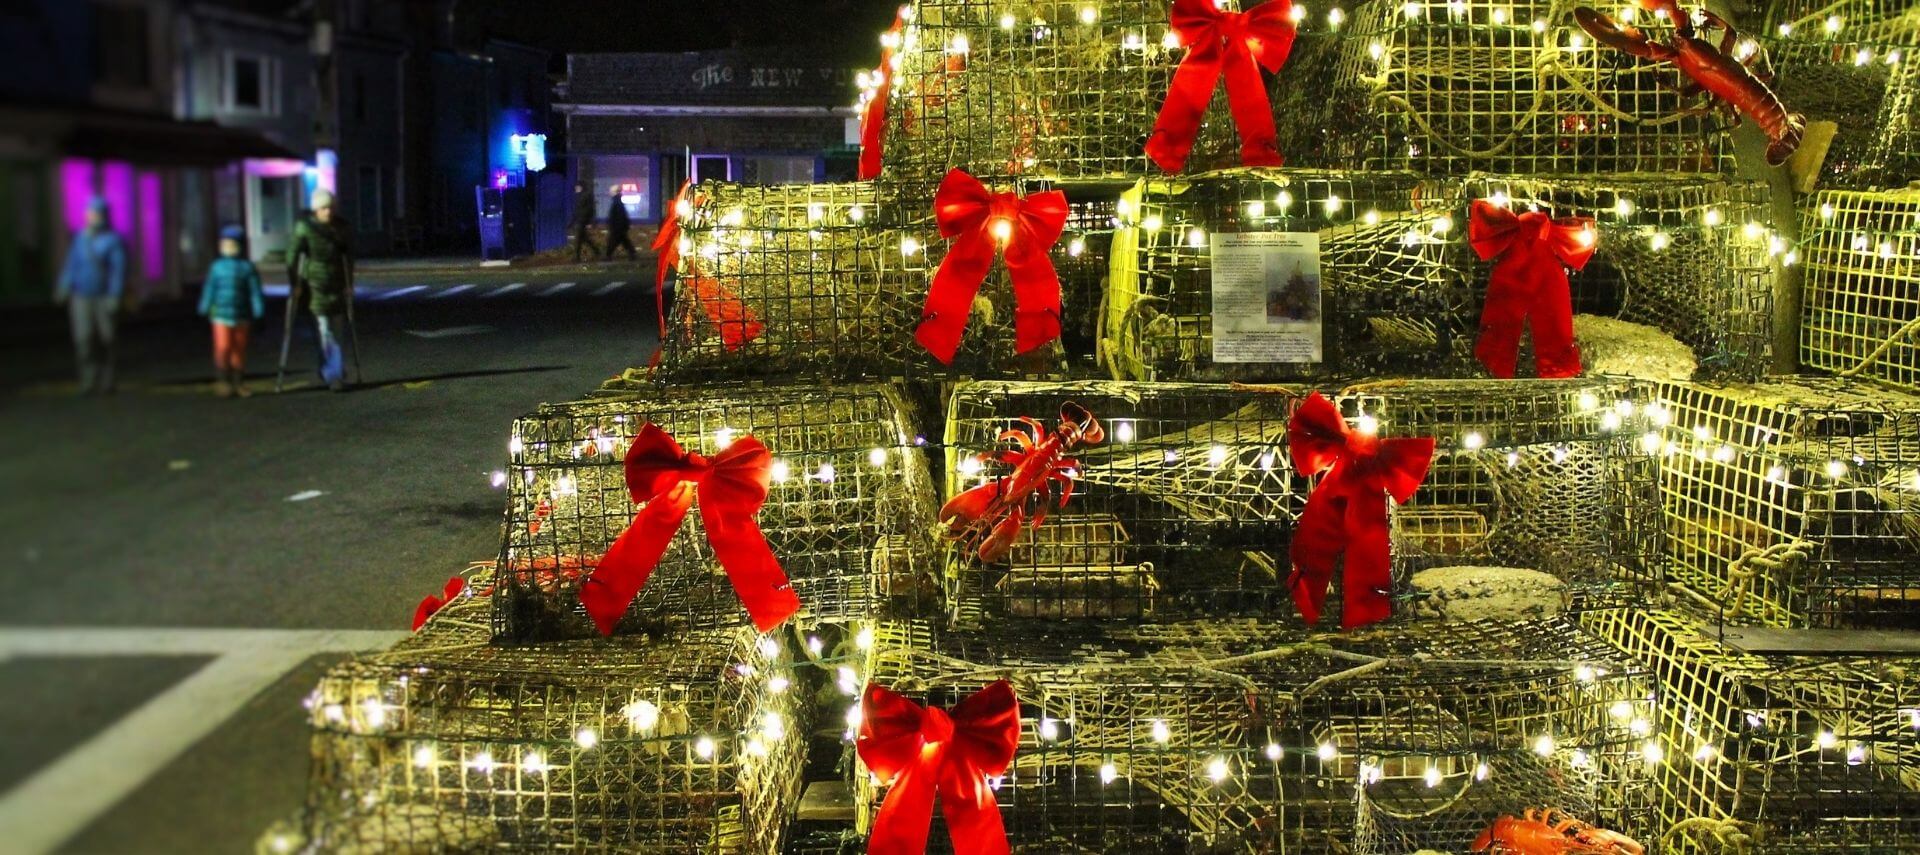 Lobster trap piled high and decorated like a Christmas tree